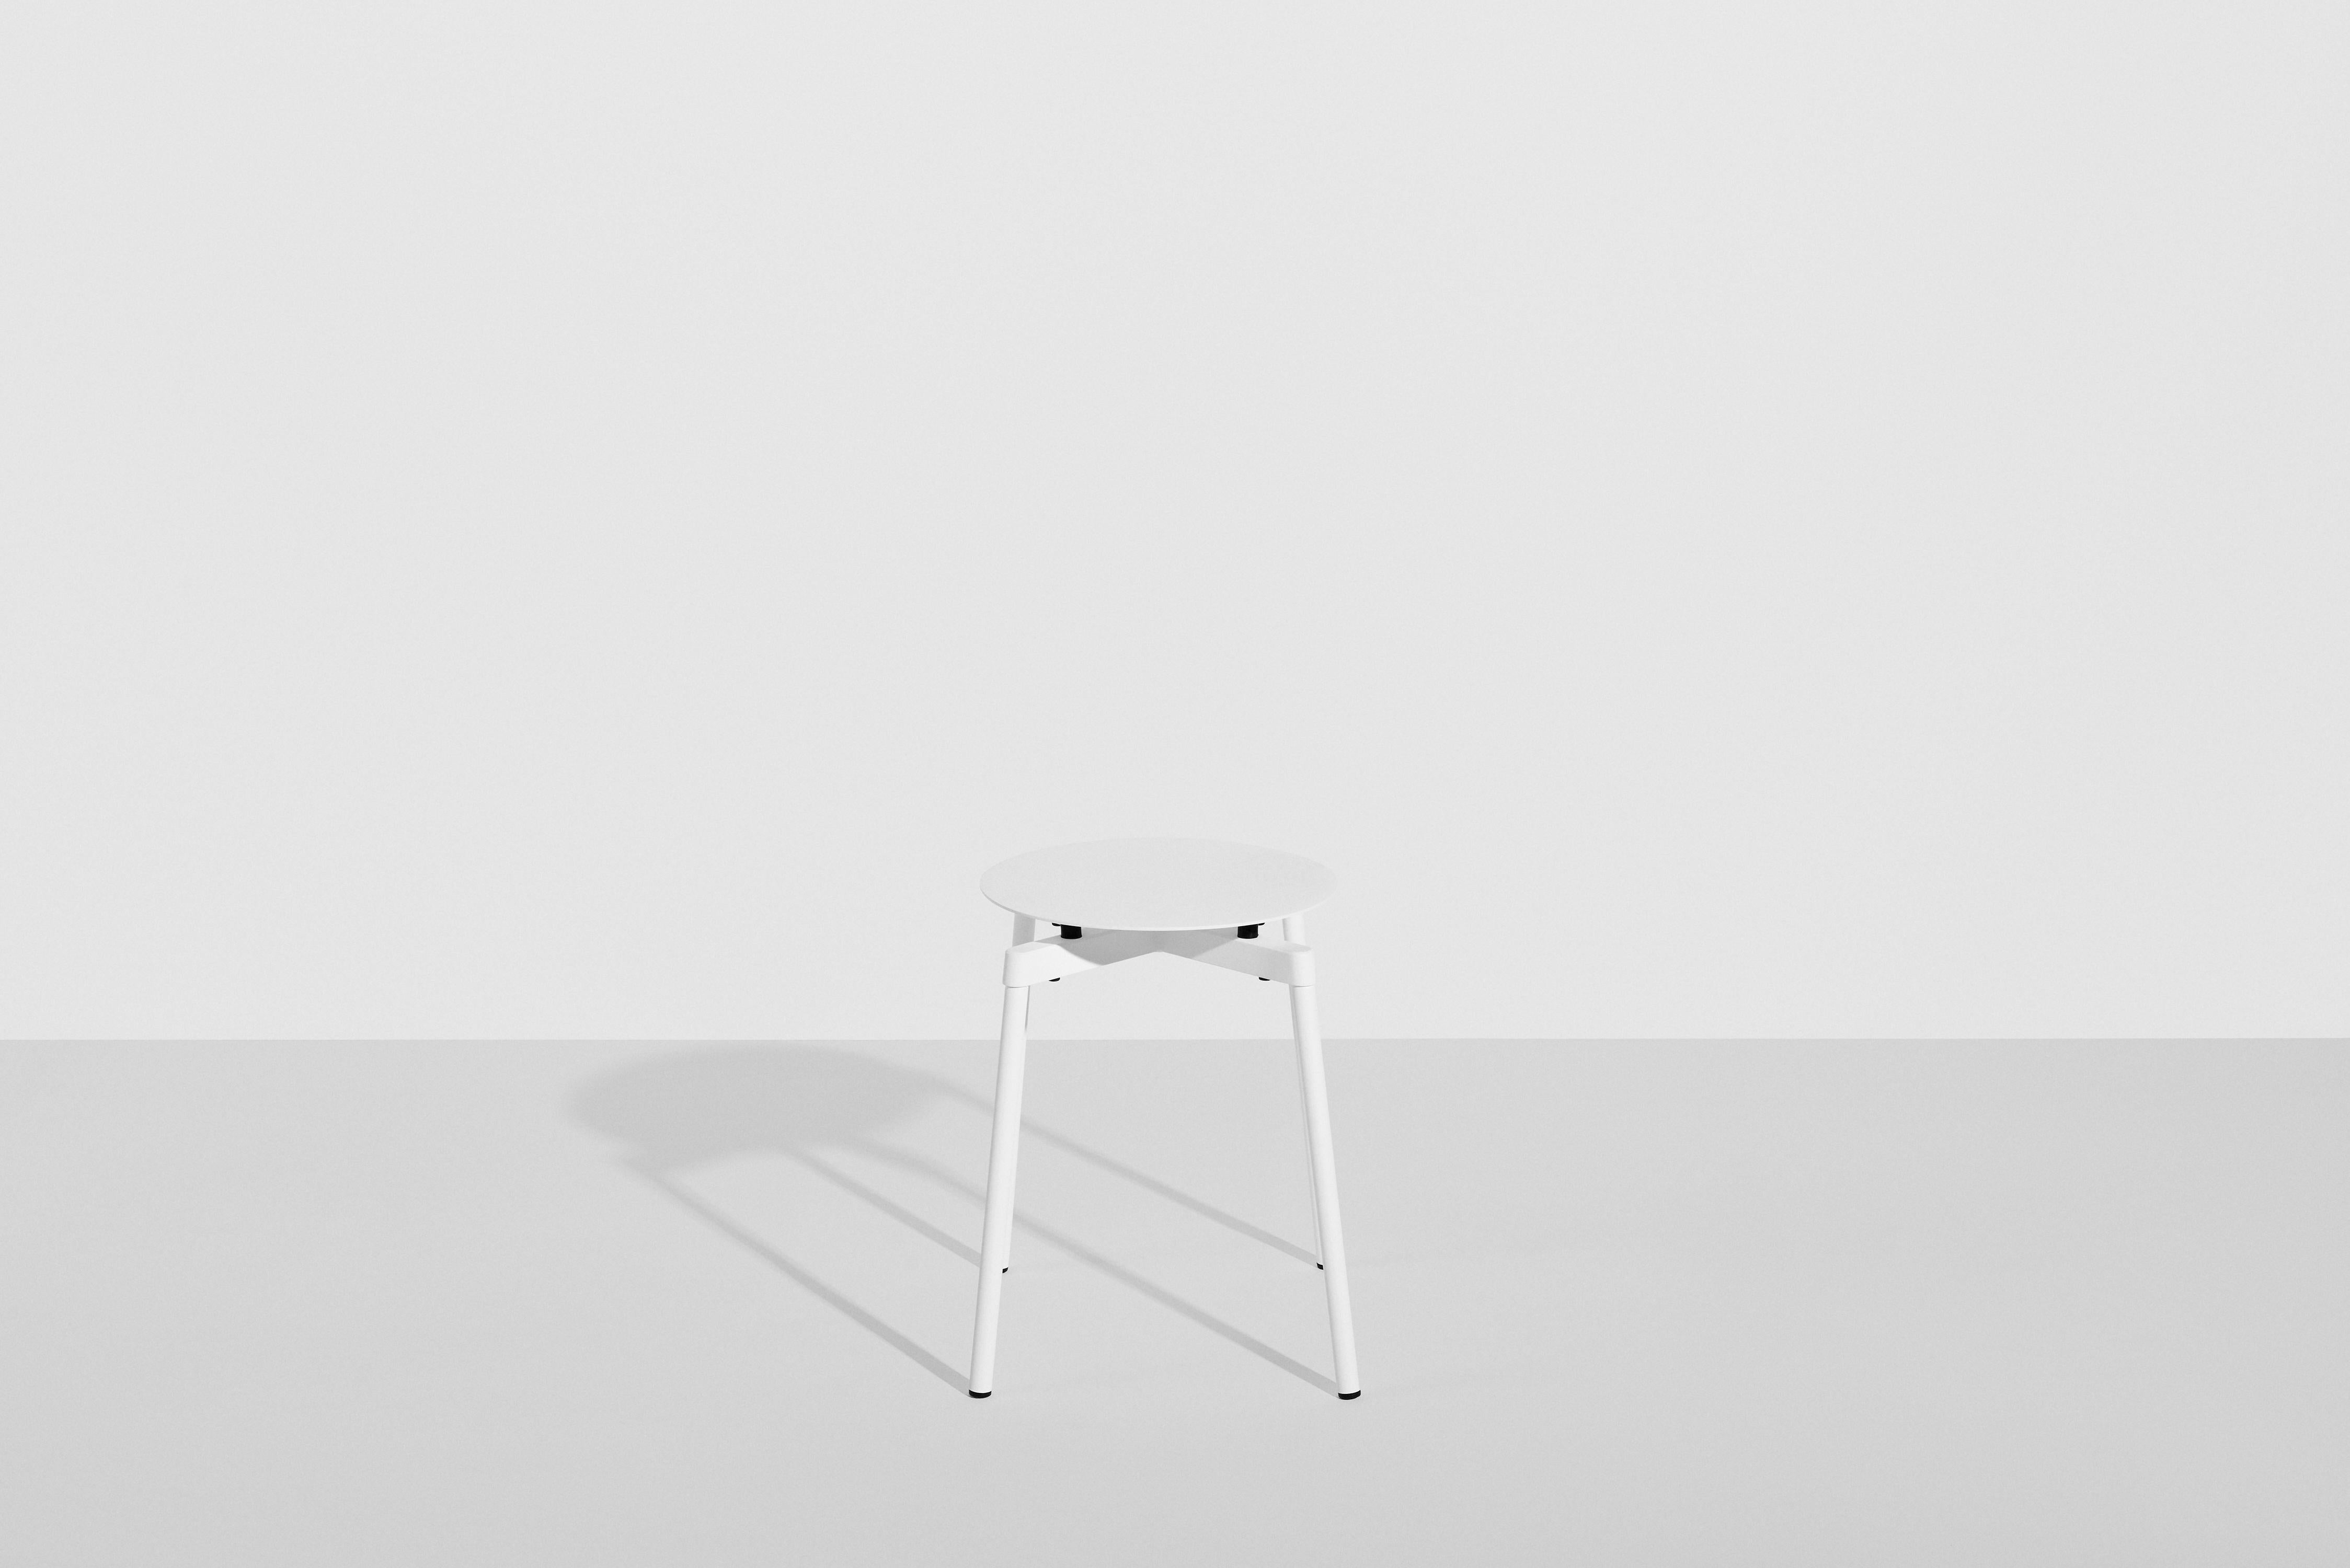 Chinese Petite Friture Fromme Stool in White Aluminium by Tom Chung, 2020 For Sale